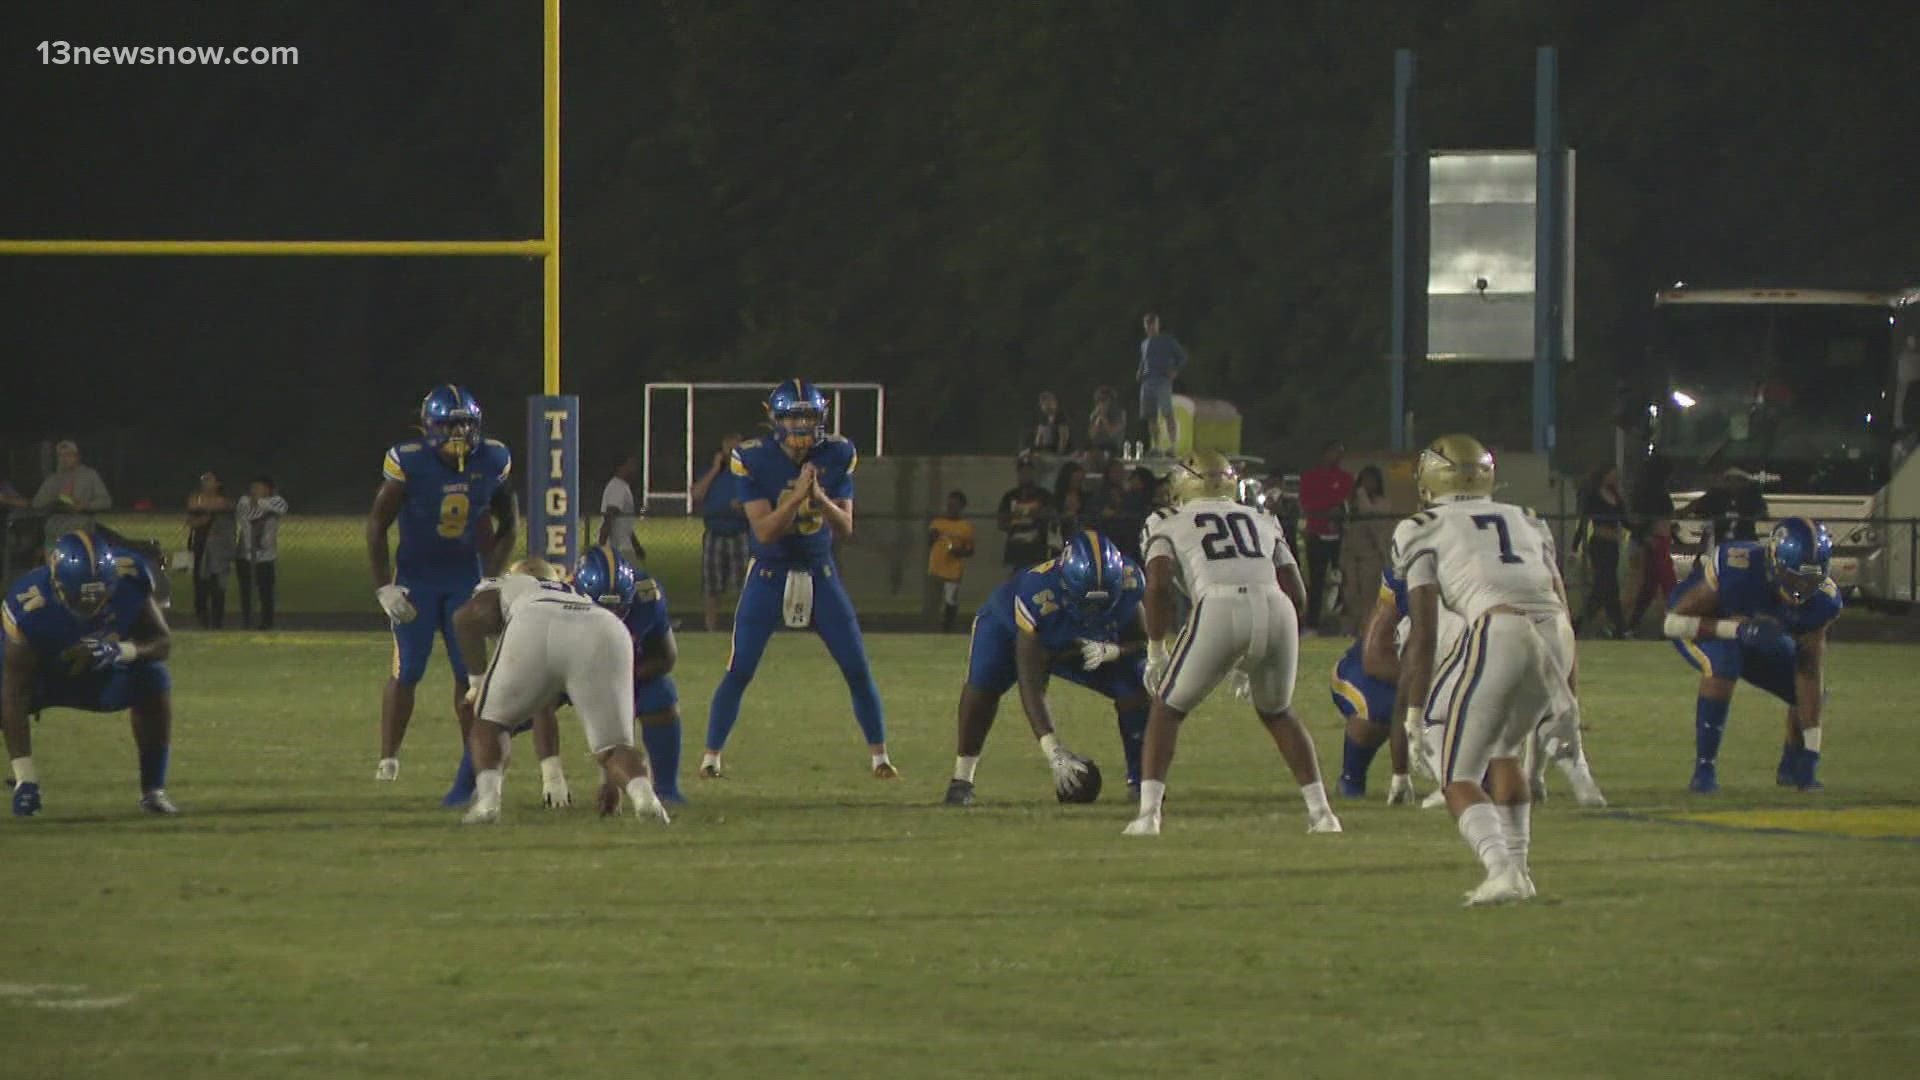 Oscar Smith was shutout before a sold out crowd at home by #3 ranked (nationally) Bosco 49-0 on Friday night.